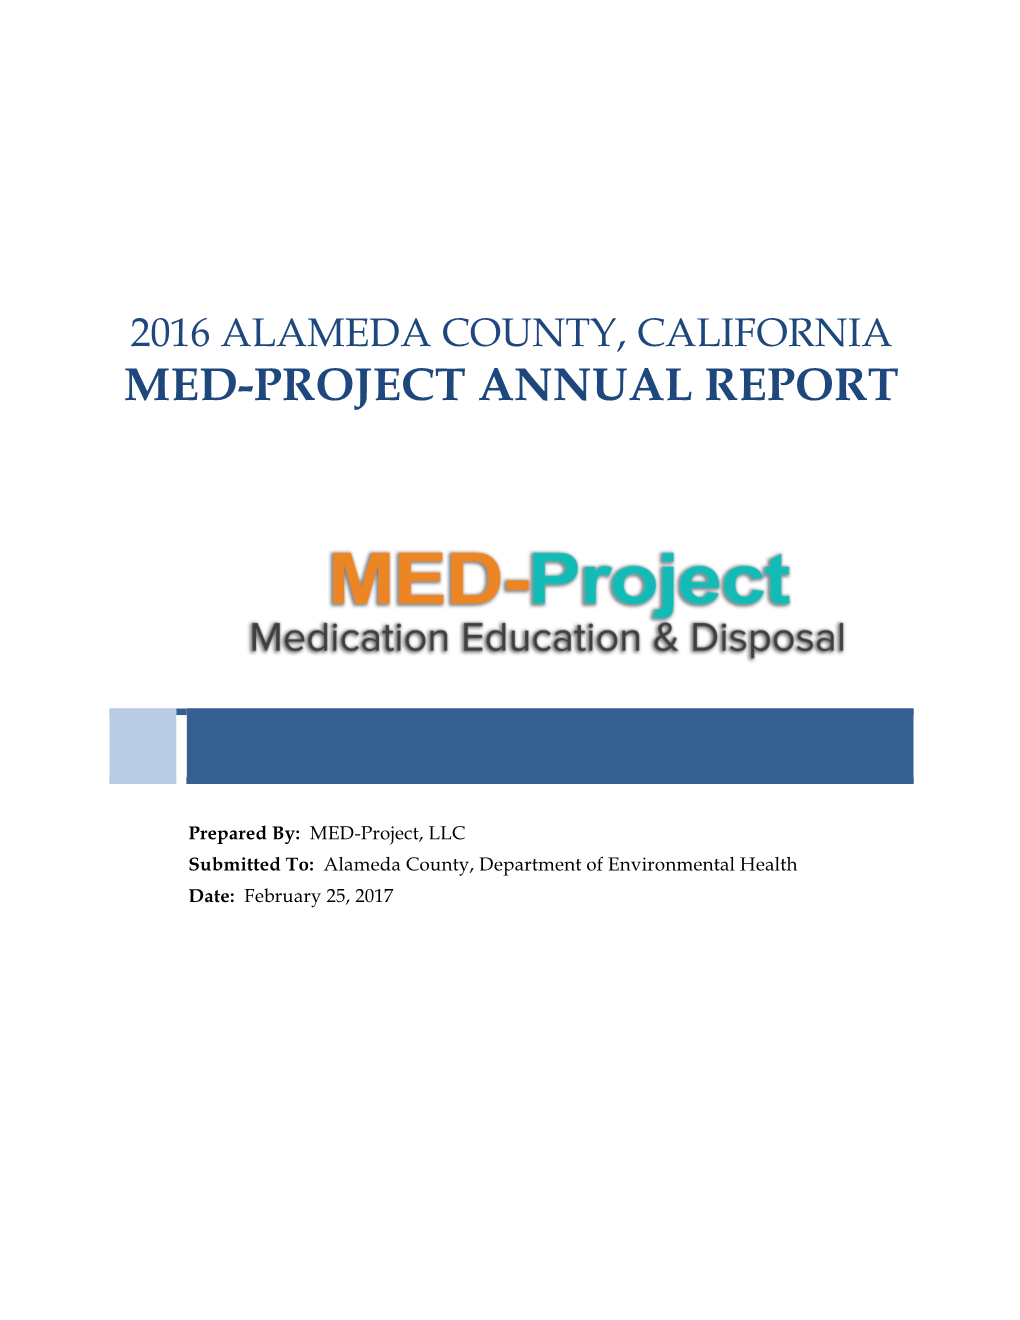 Alameda MED-Project 2016 Annual Report